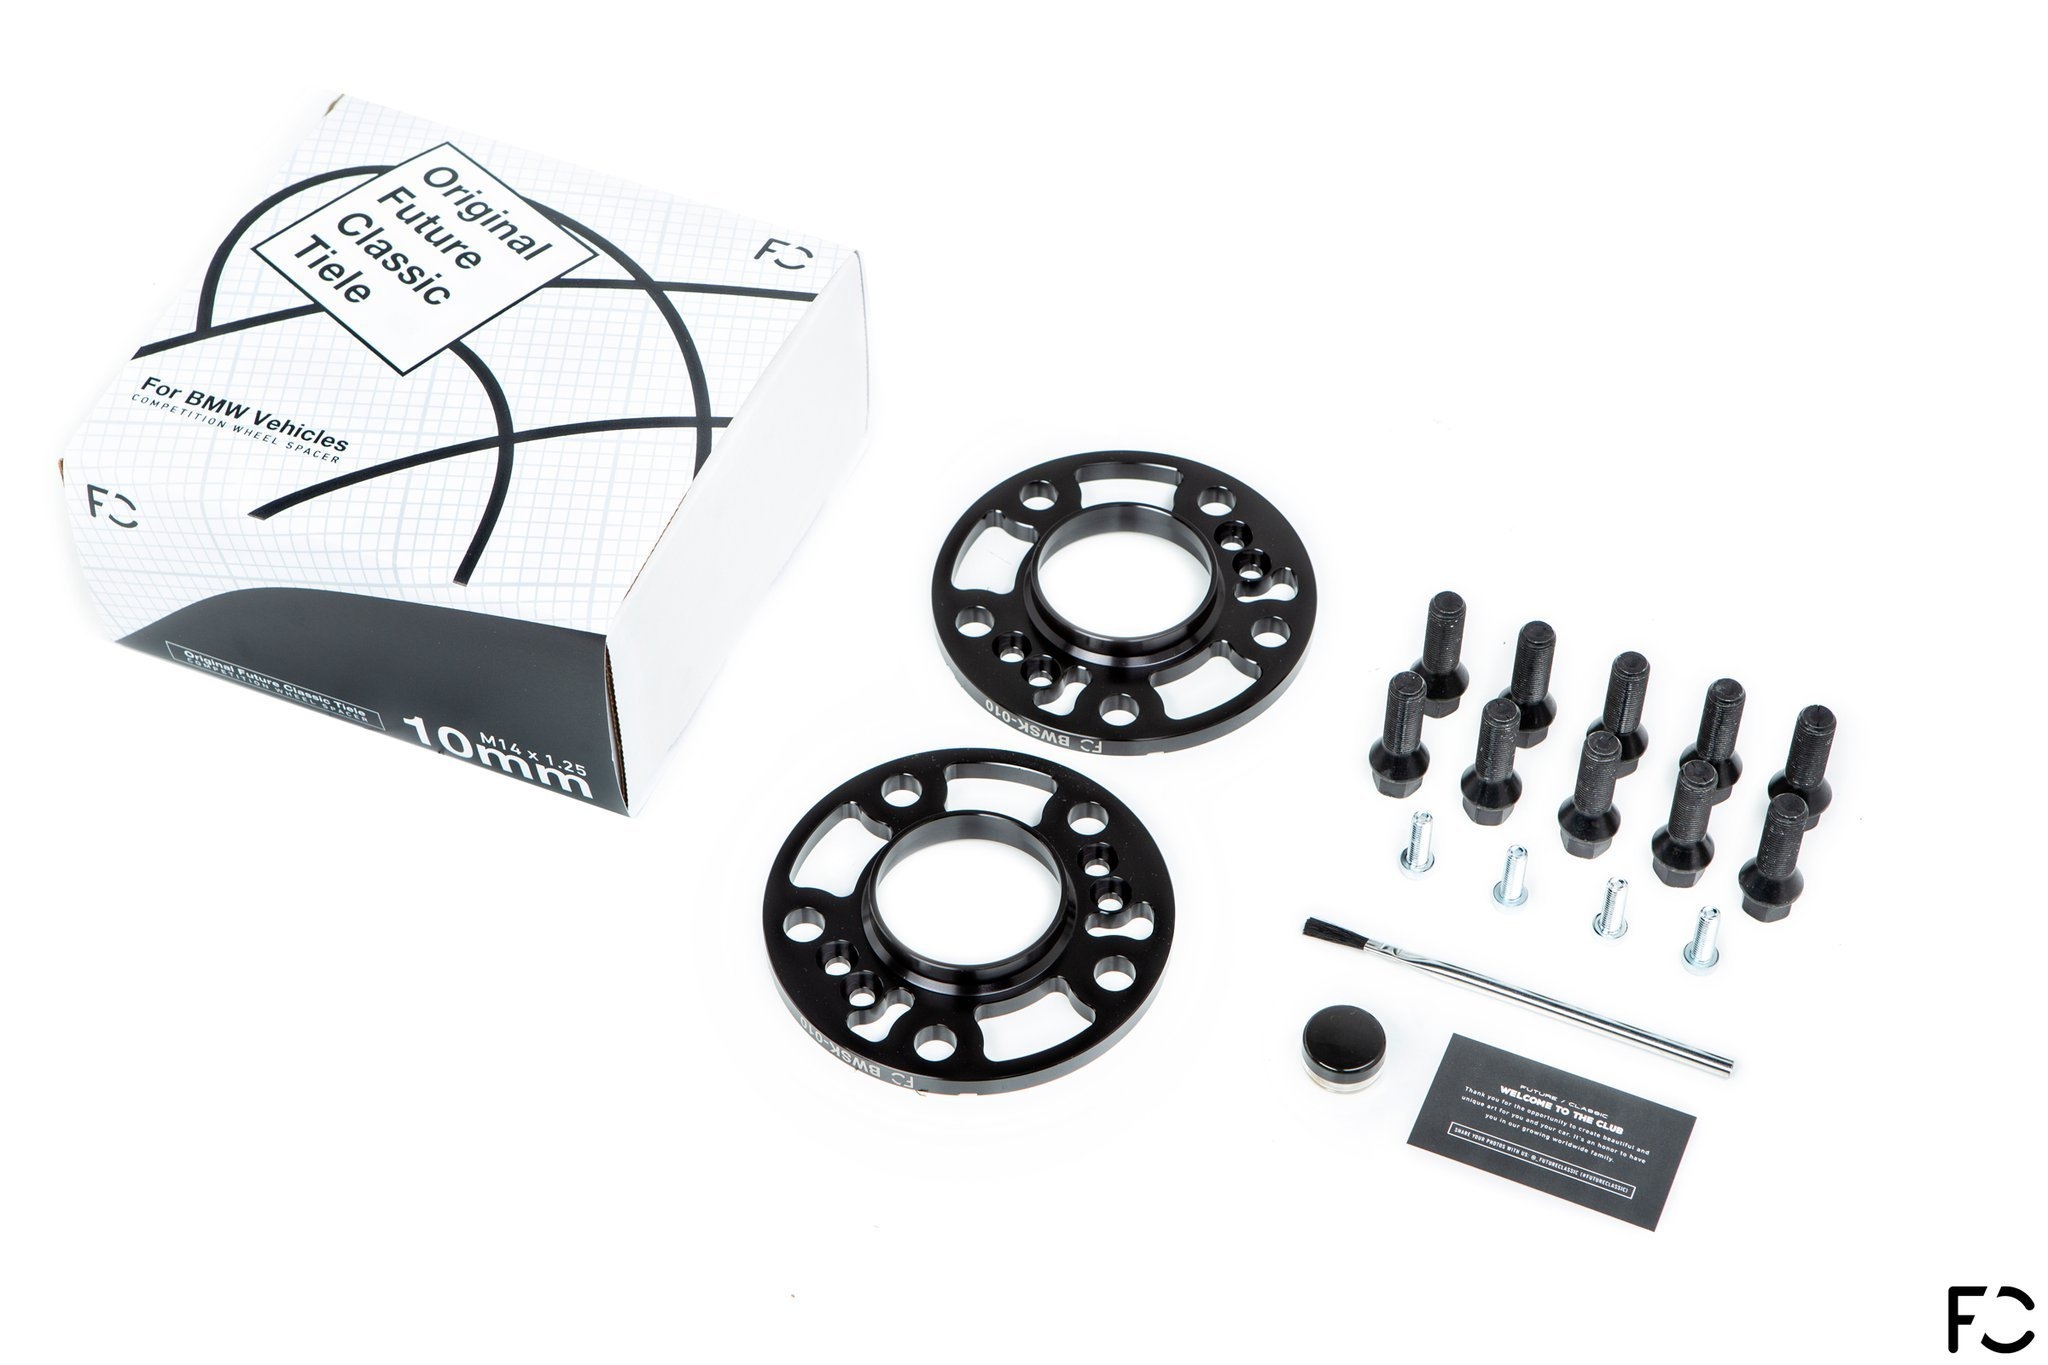 Future Classic 5×120 Wheel Spacer Kit for BMW (2002-2021, Fxx) 18mm – M12 x 1.5 – AUTOID